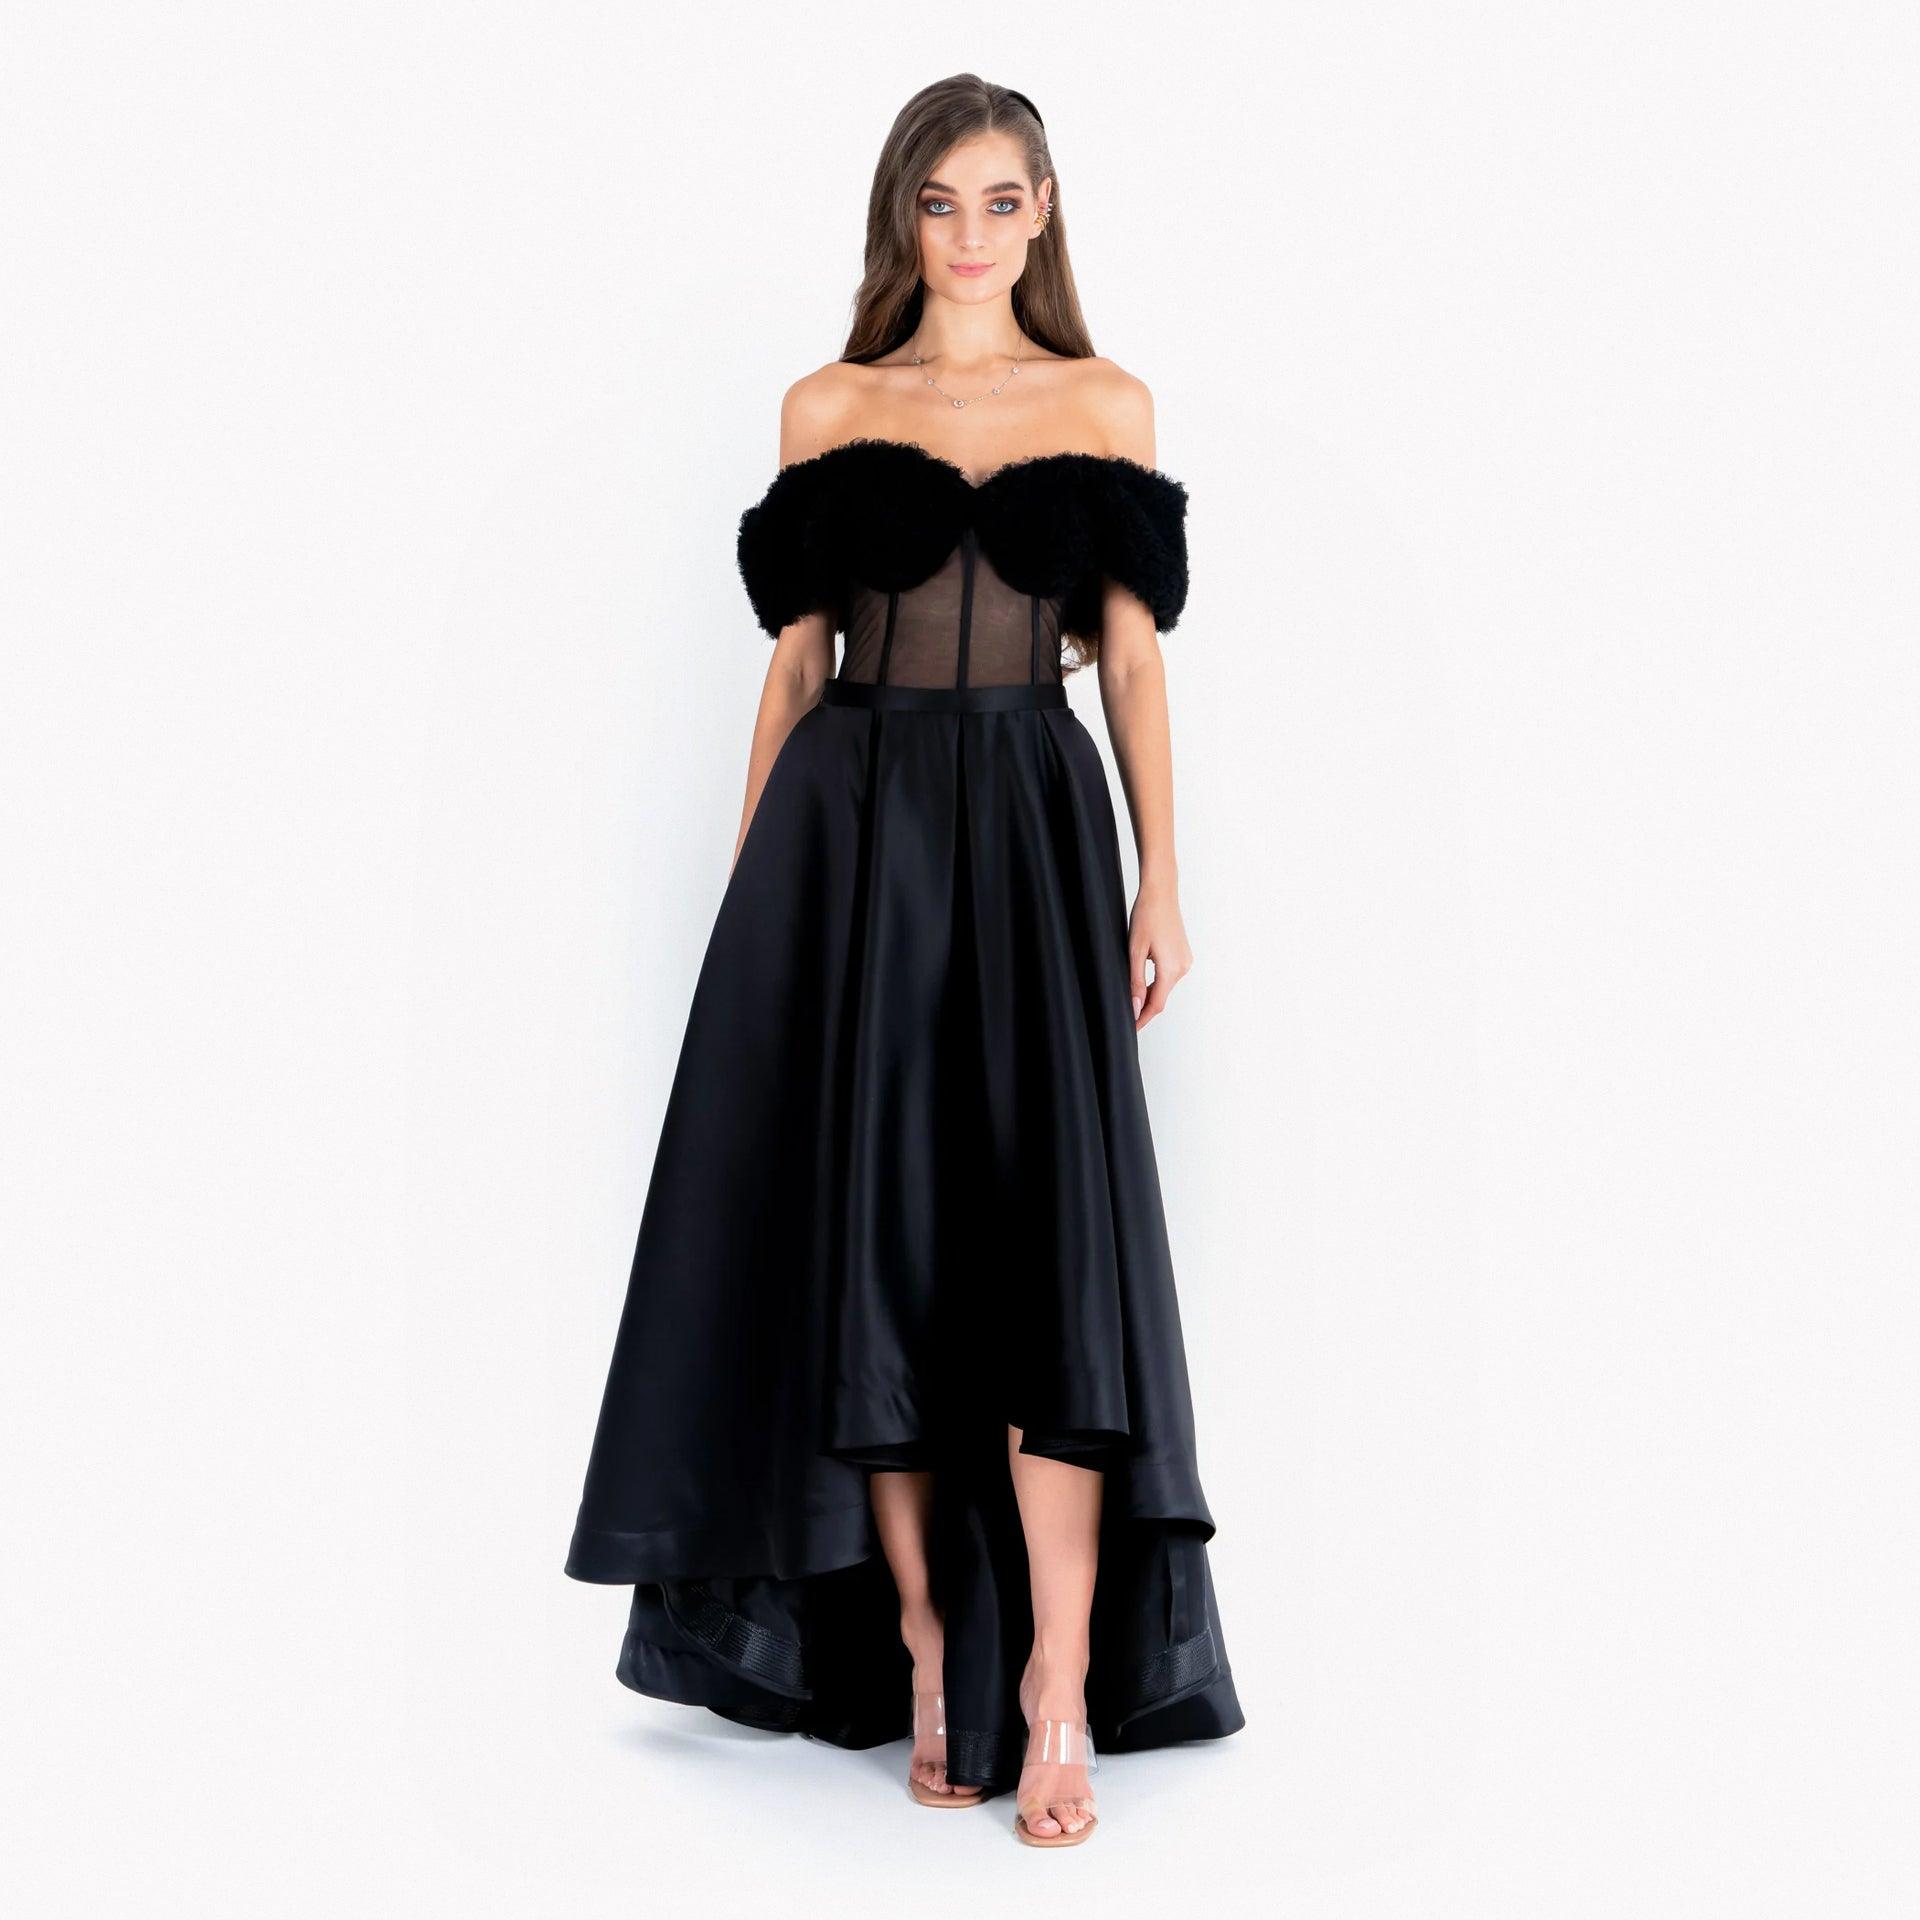 Black Sheering Off Shoulder Gown With Satin Skirt By AAVVA - WECRE8